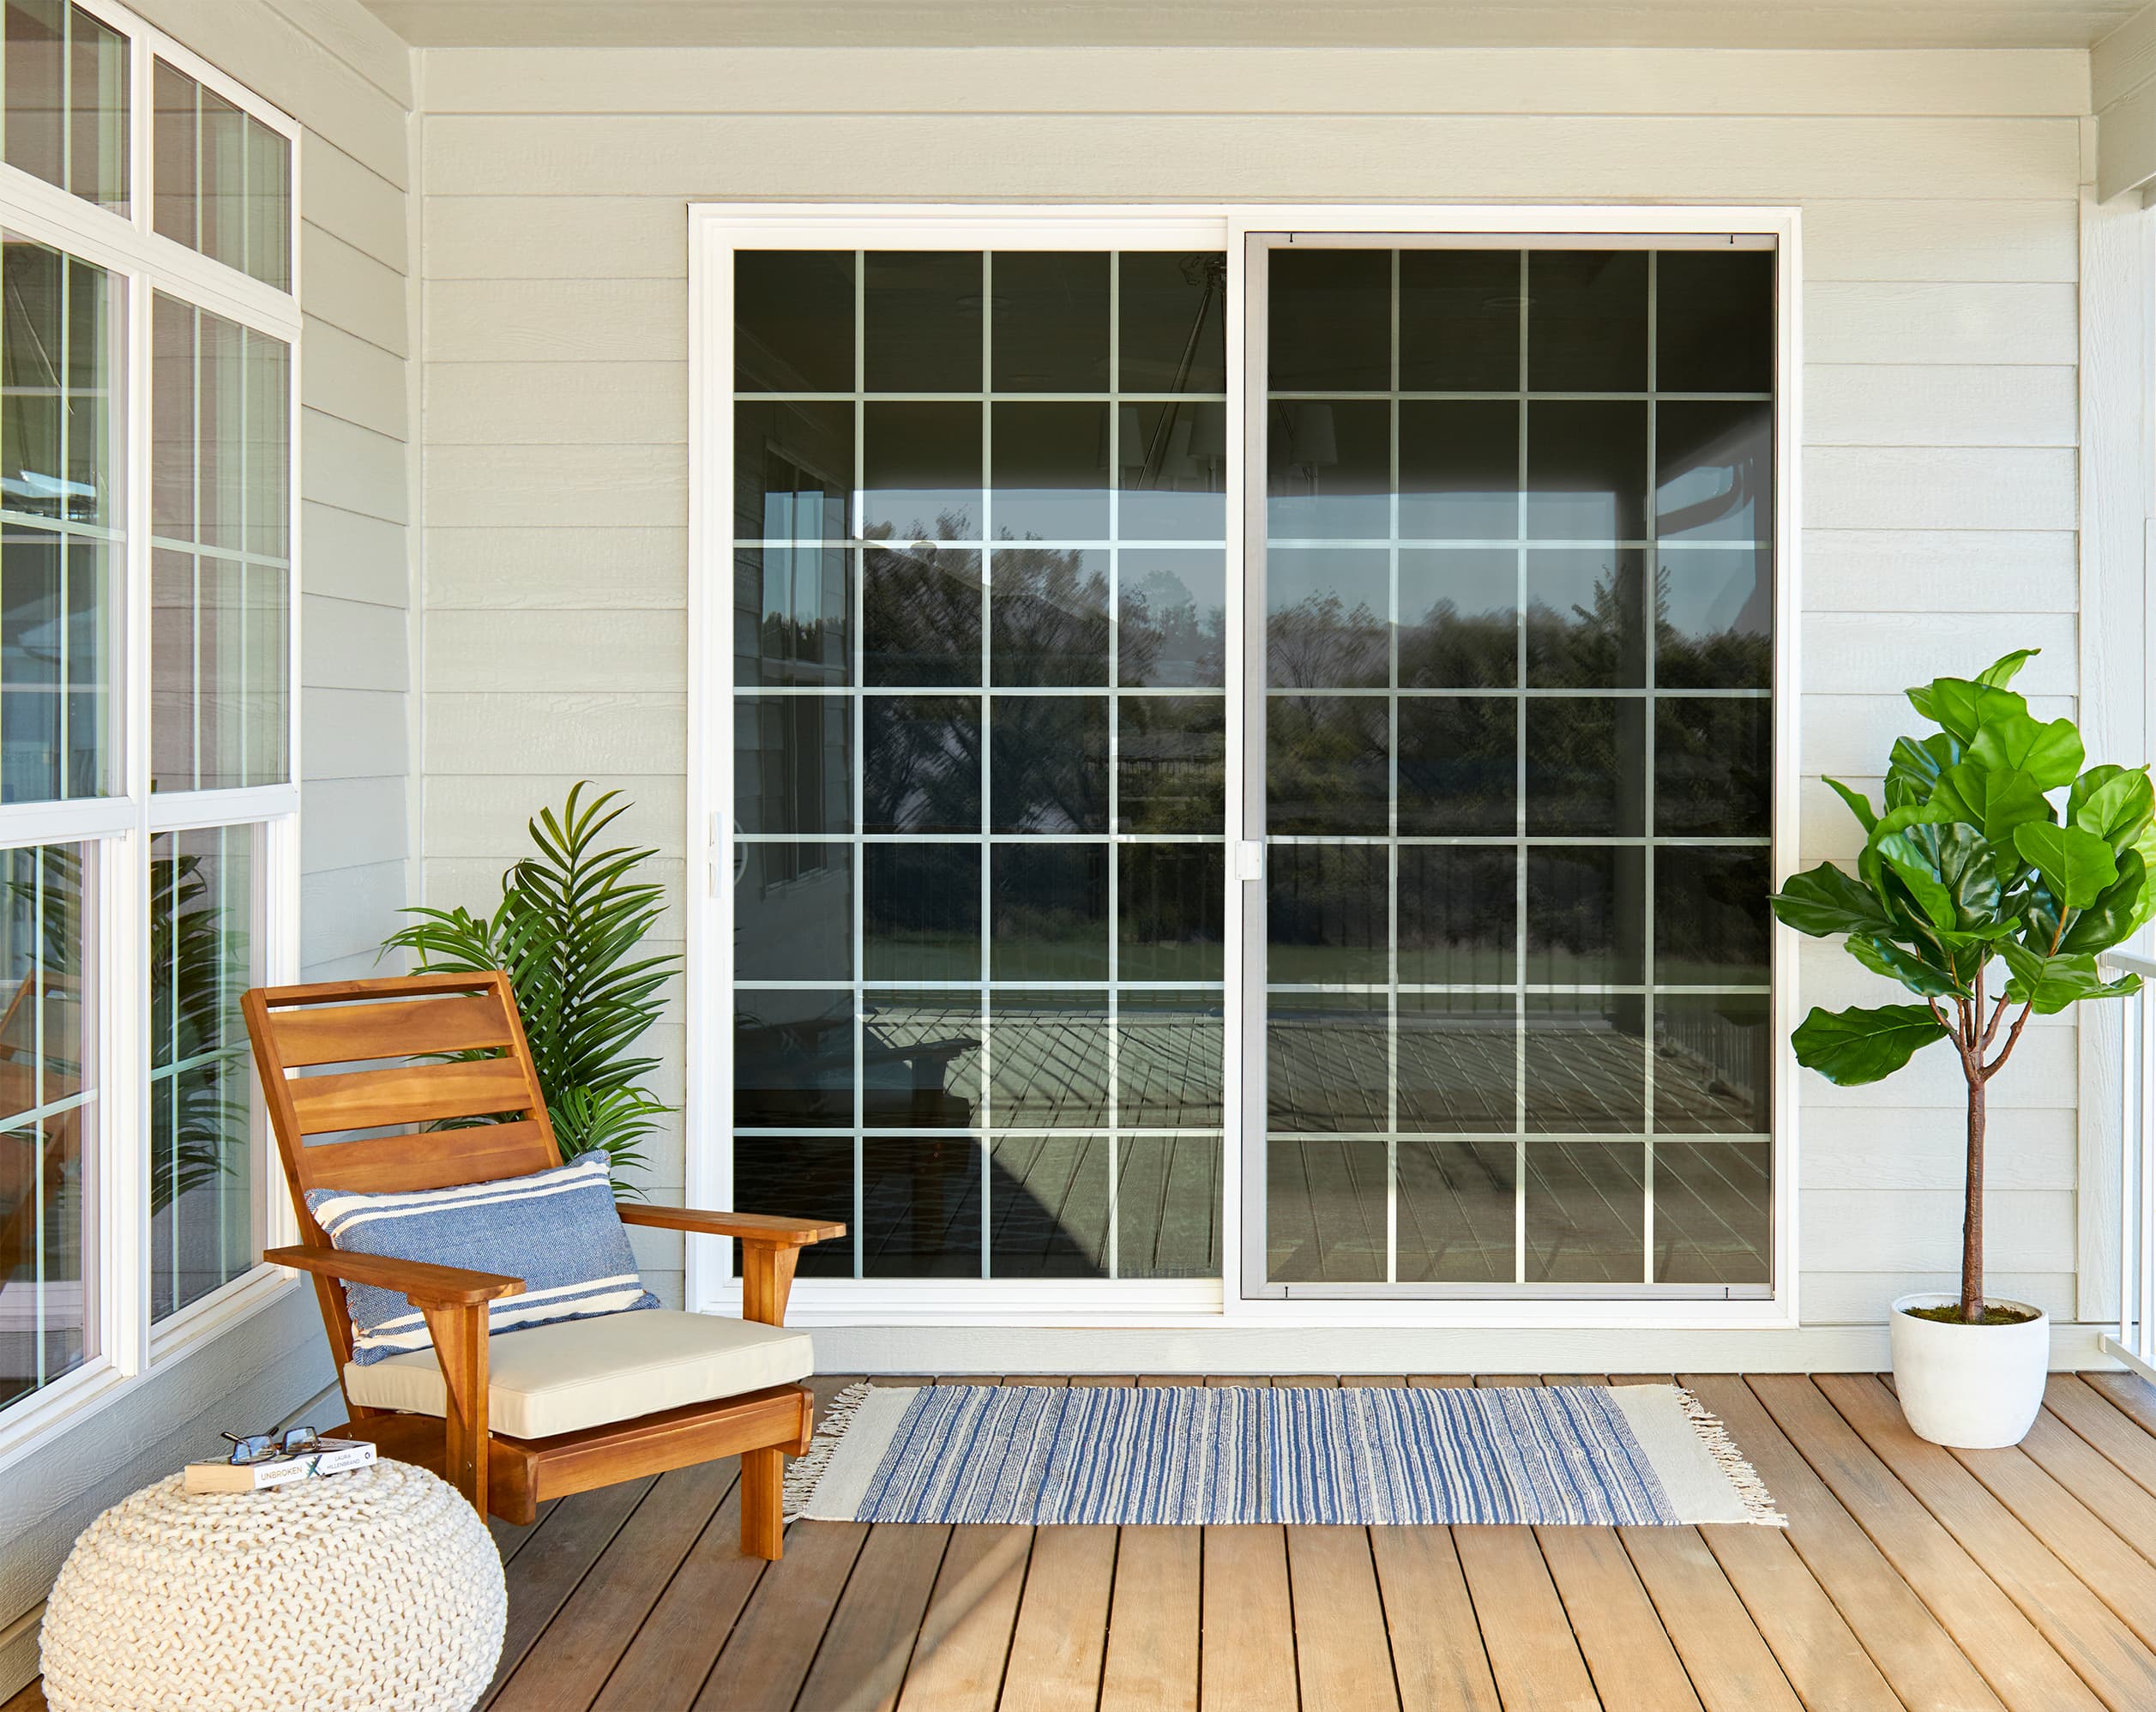 Slider Windows: Easy to use, easy to clean – Why this style is so popular -  Pella Branch